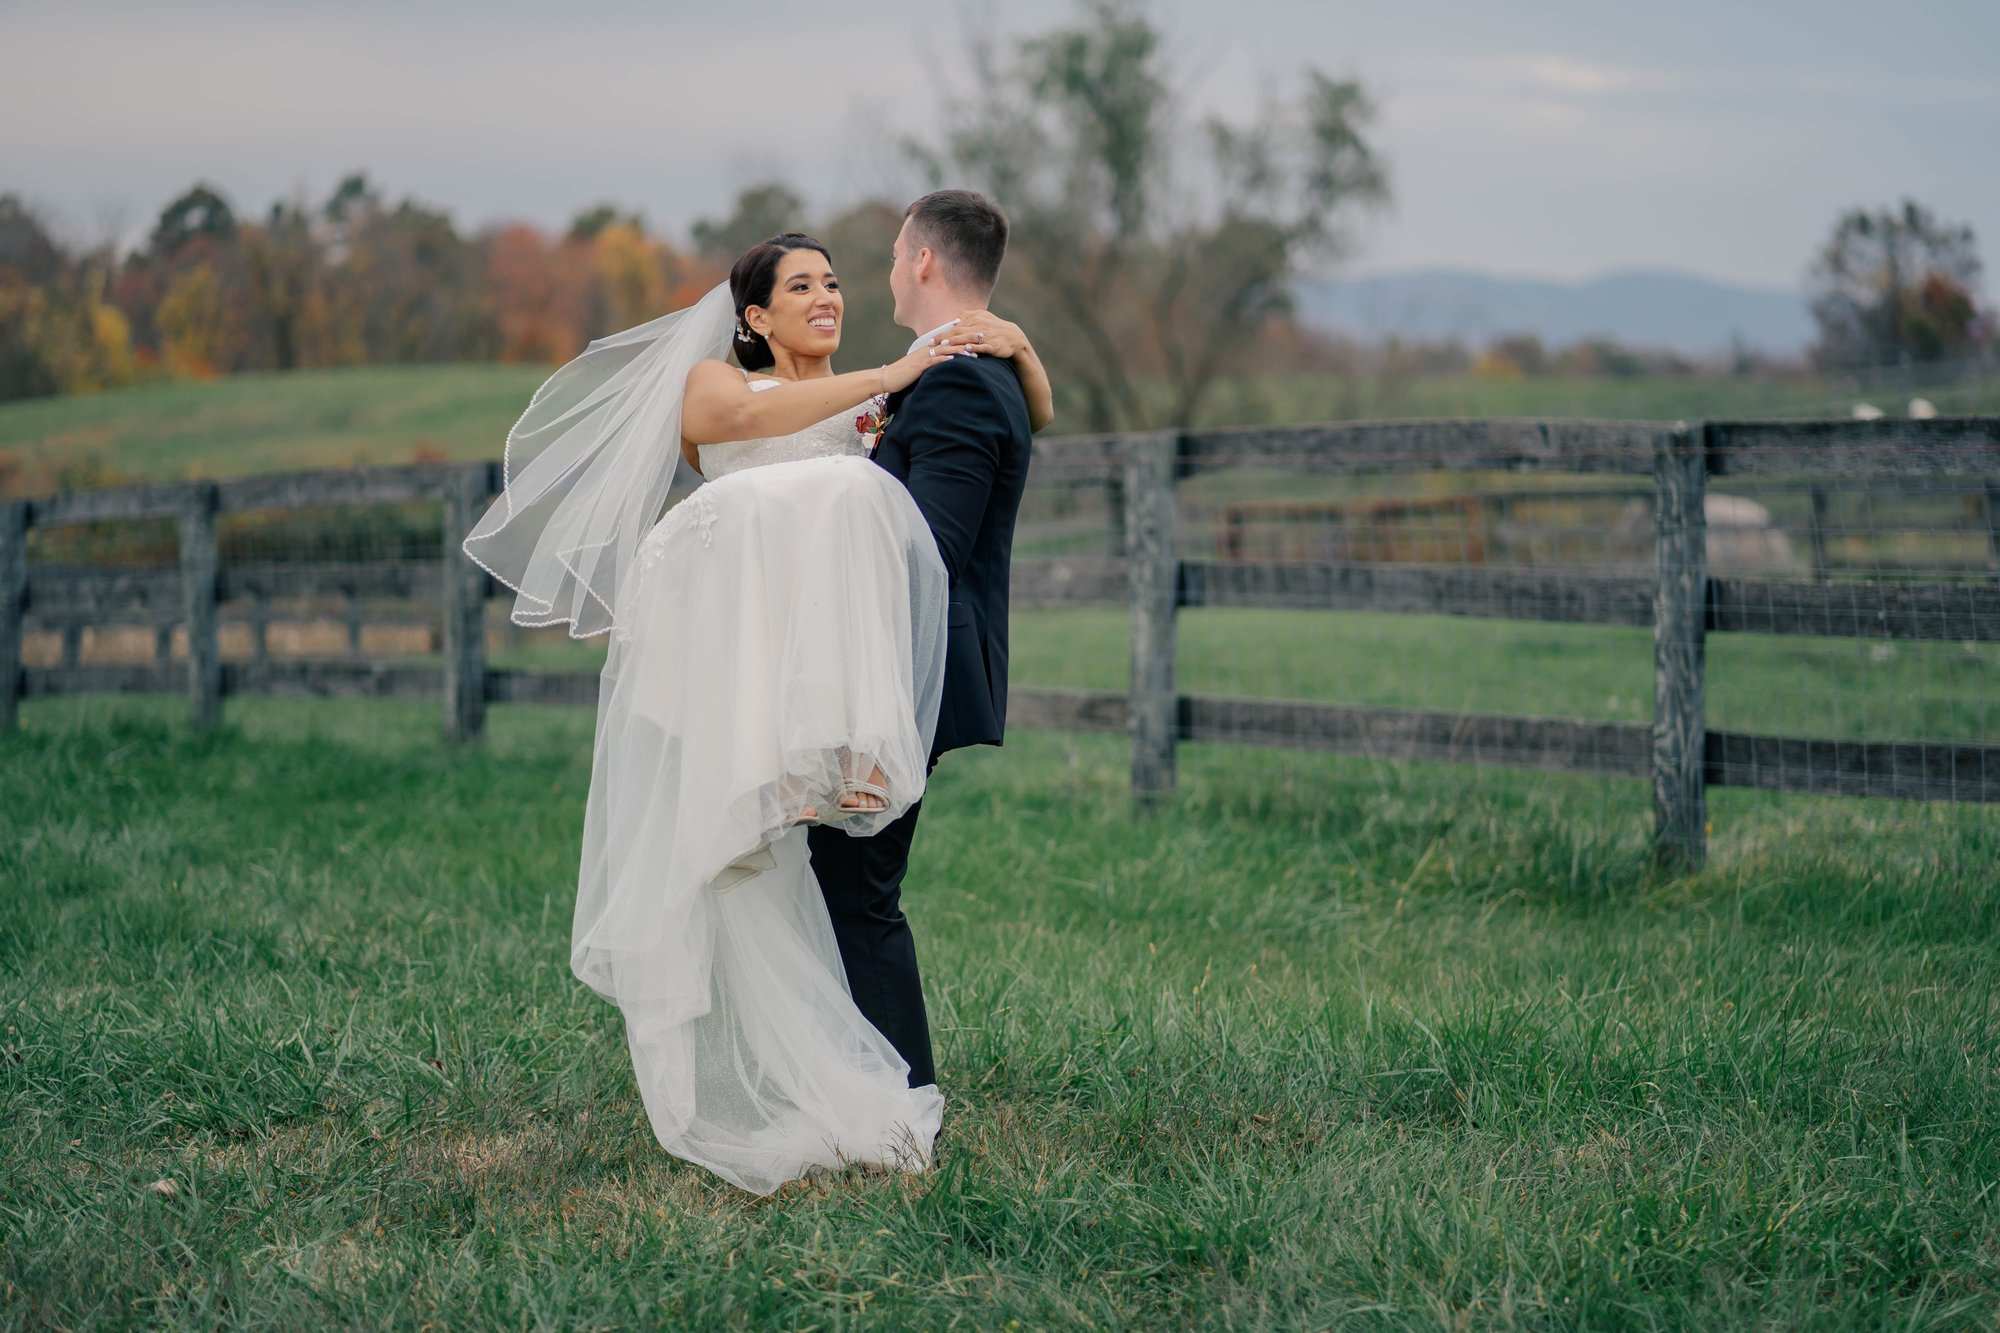 Virginia wedding photography of a couple just marred in Leesburg, Virginia captured by Stephanie Grooms Artistry